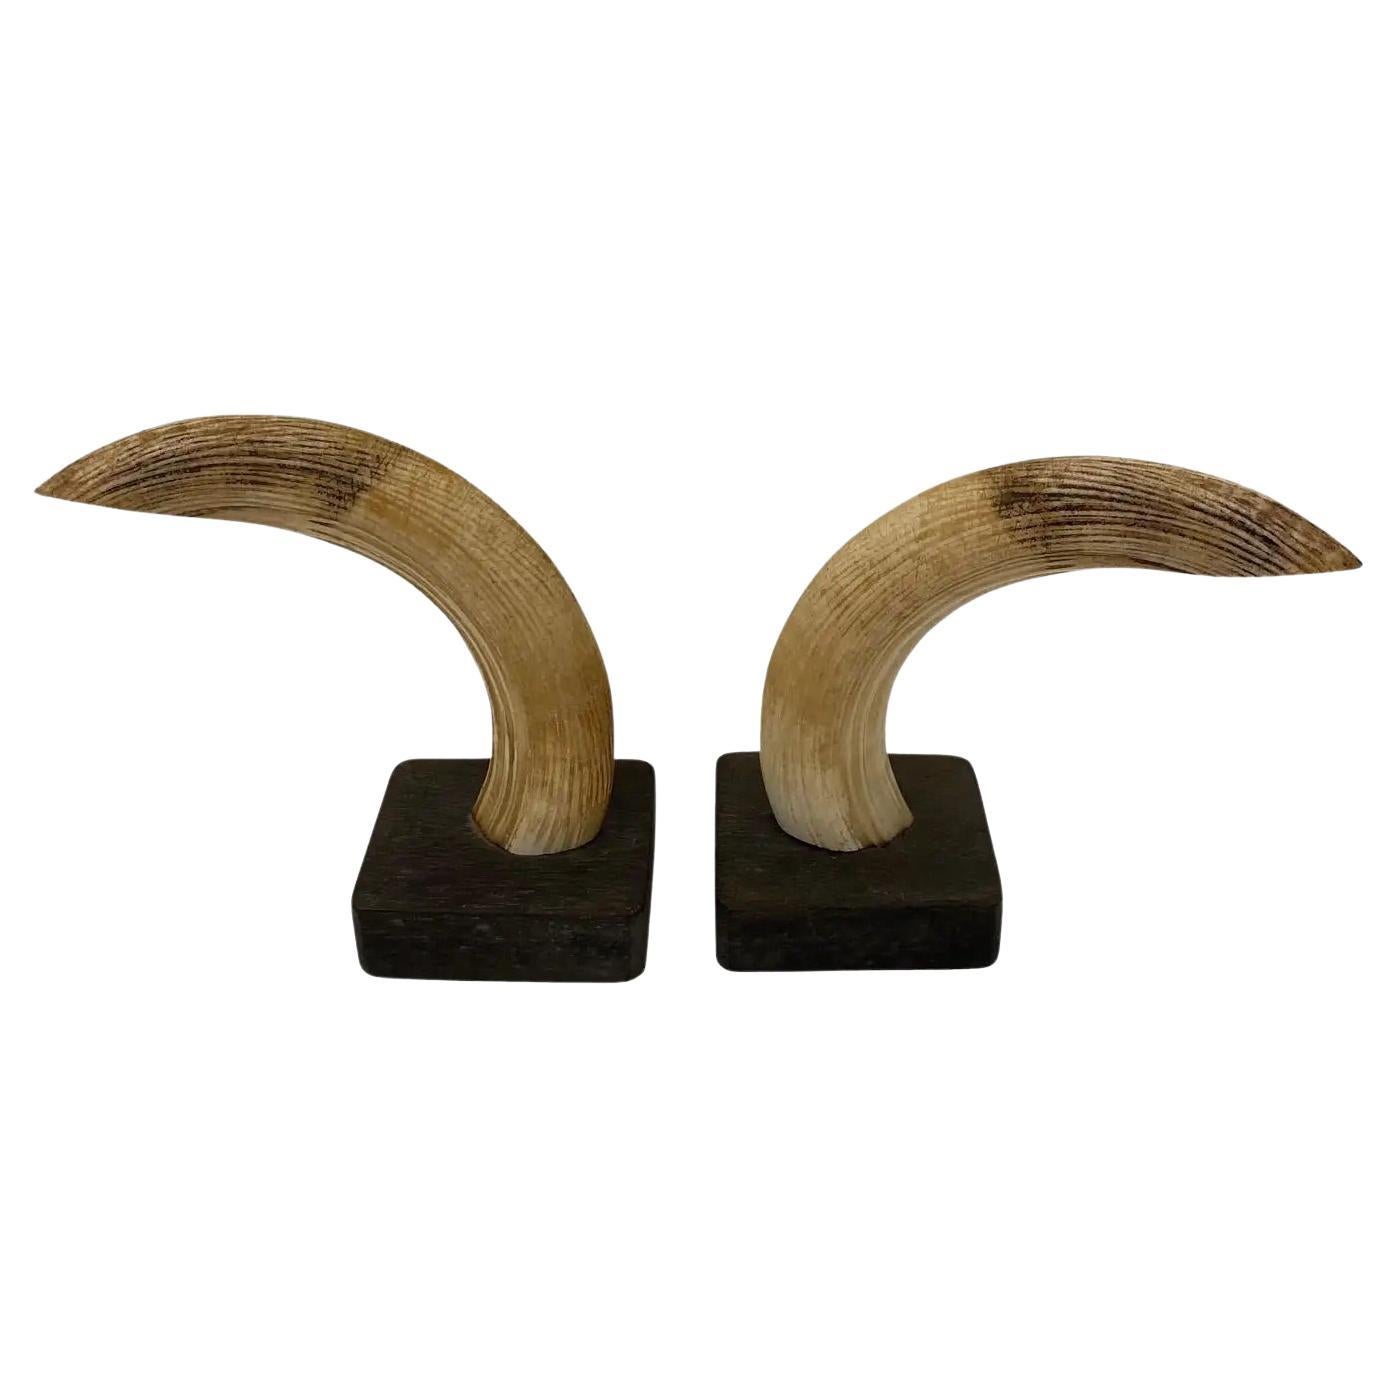 Pair of Natural Hippopatomus Teeth Mounted Bookends, Turn-of-the-Century